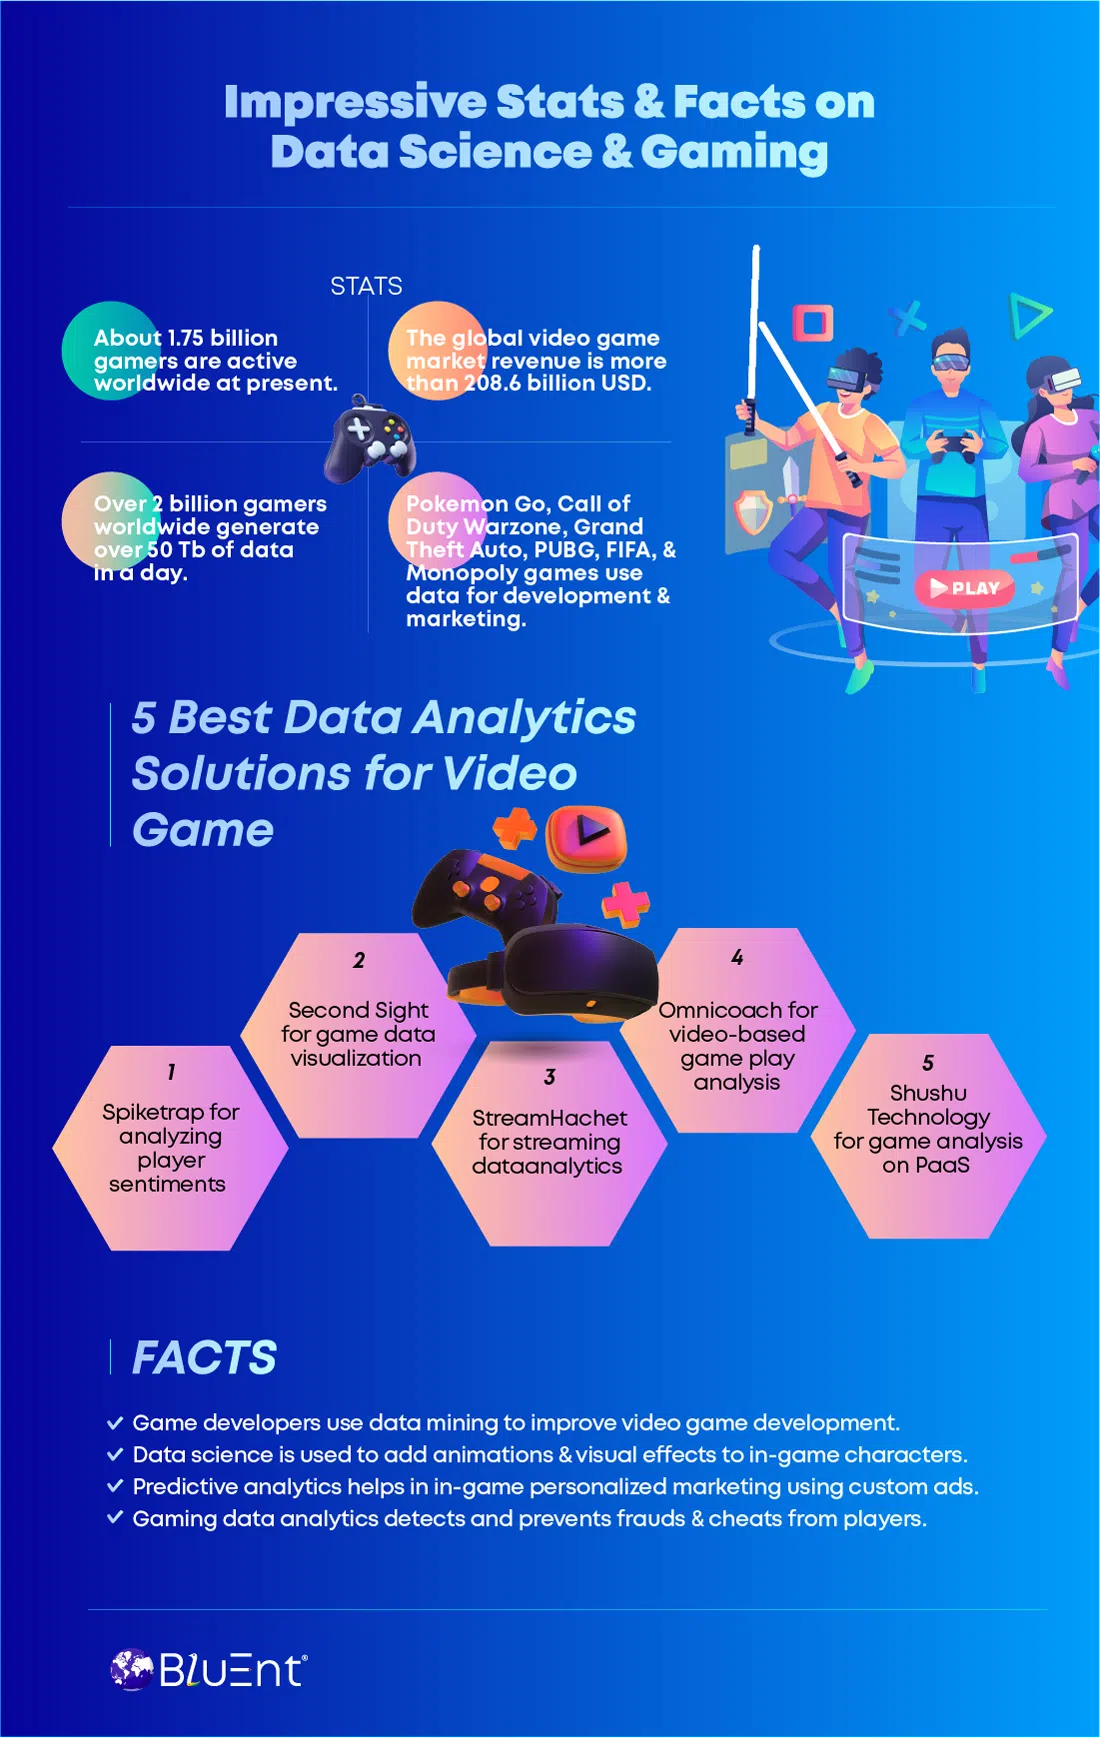 Impressive statistics and facts on data analytics in the gaming